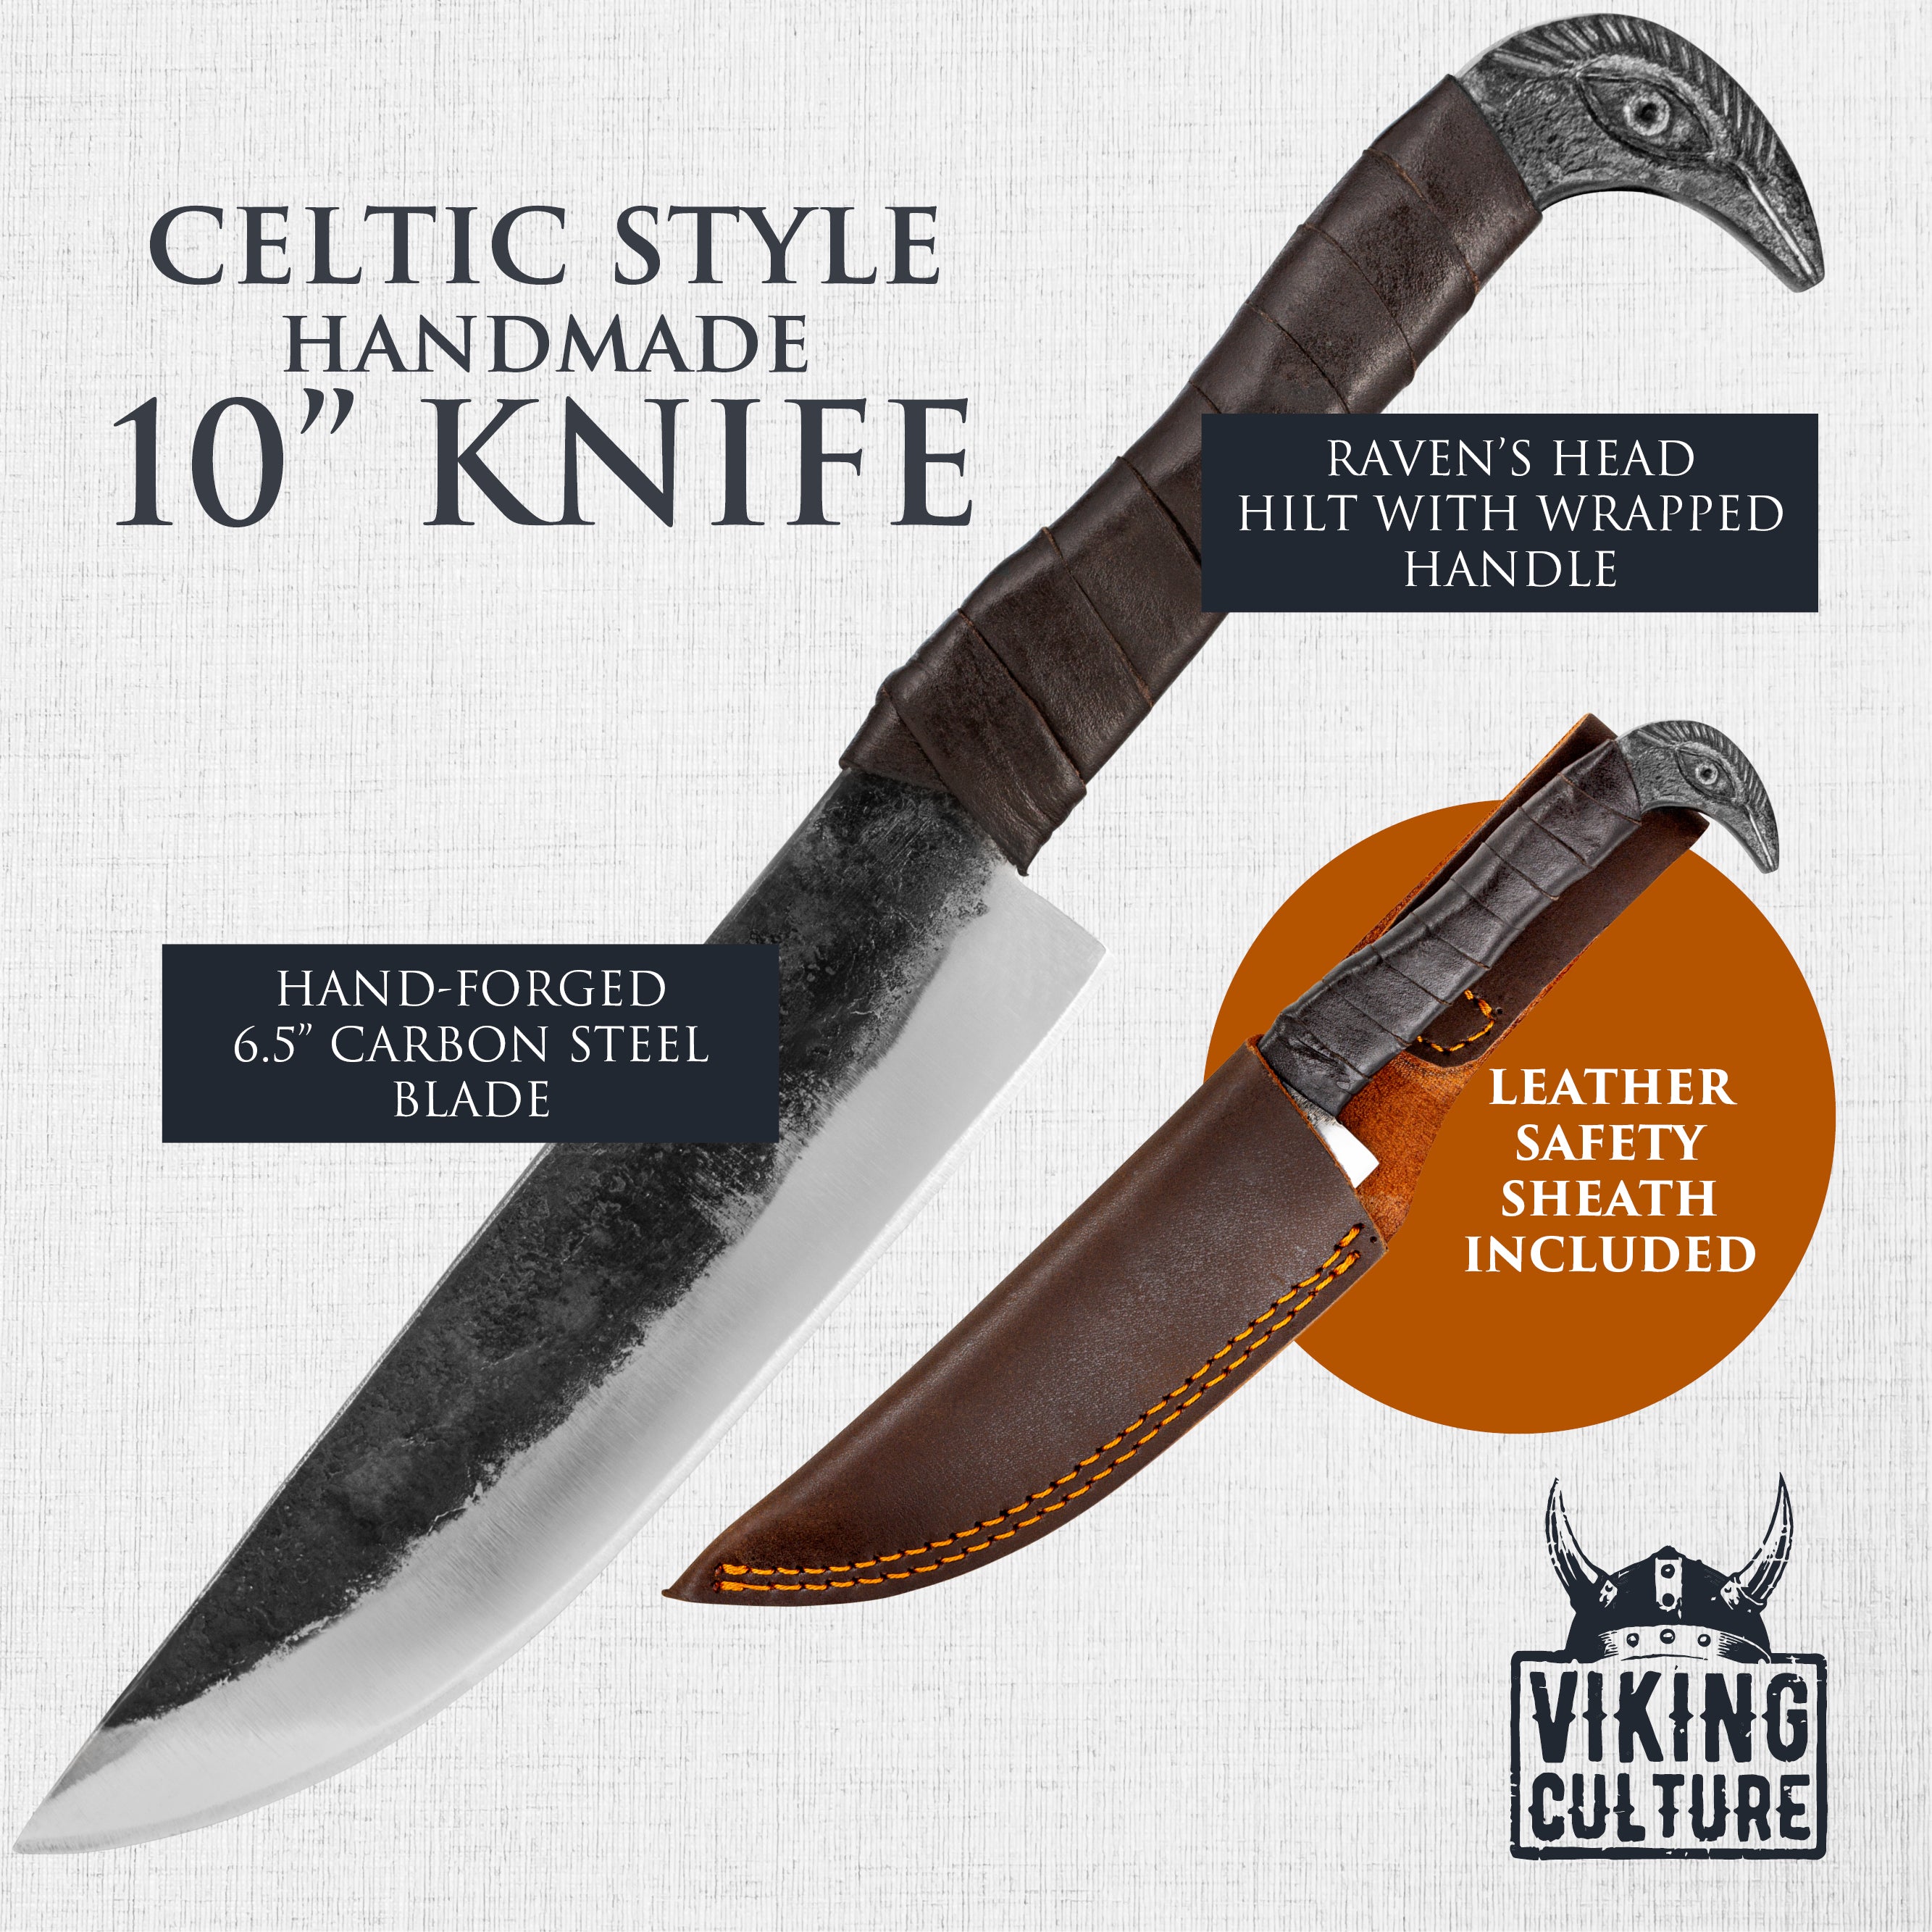 Viking Culture 2-Piece Viking Knife Set - 10.3" Raven-Head Viking Knife with 6.5" Blade & Leather Sheath - 3" Celtic Pocket Knife with Necklace Case - Sharp Hand-Forged Real Carbon Steel